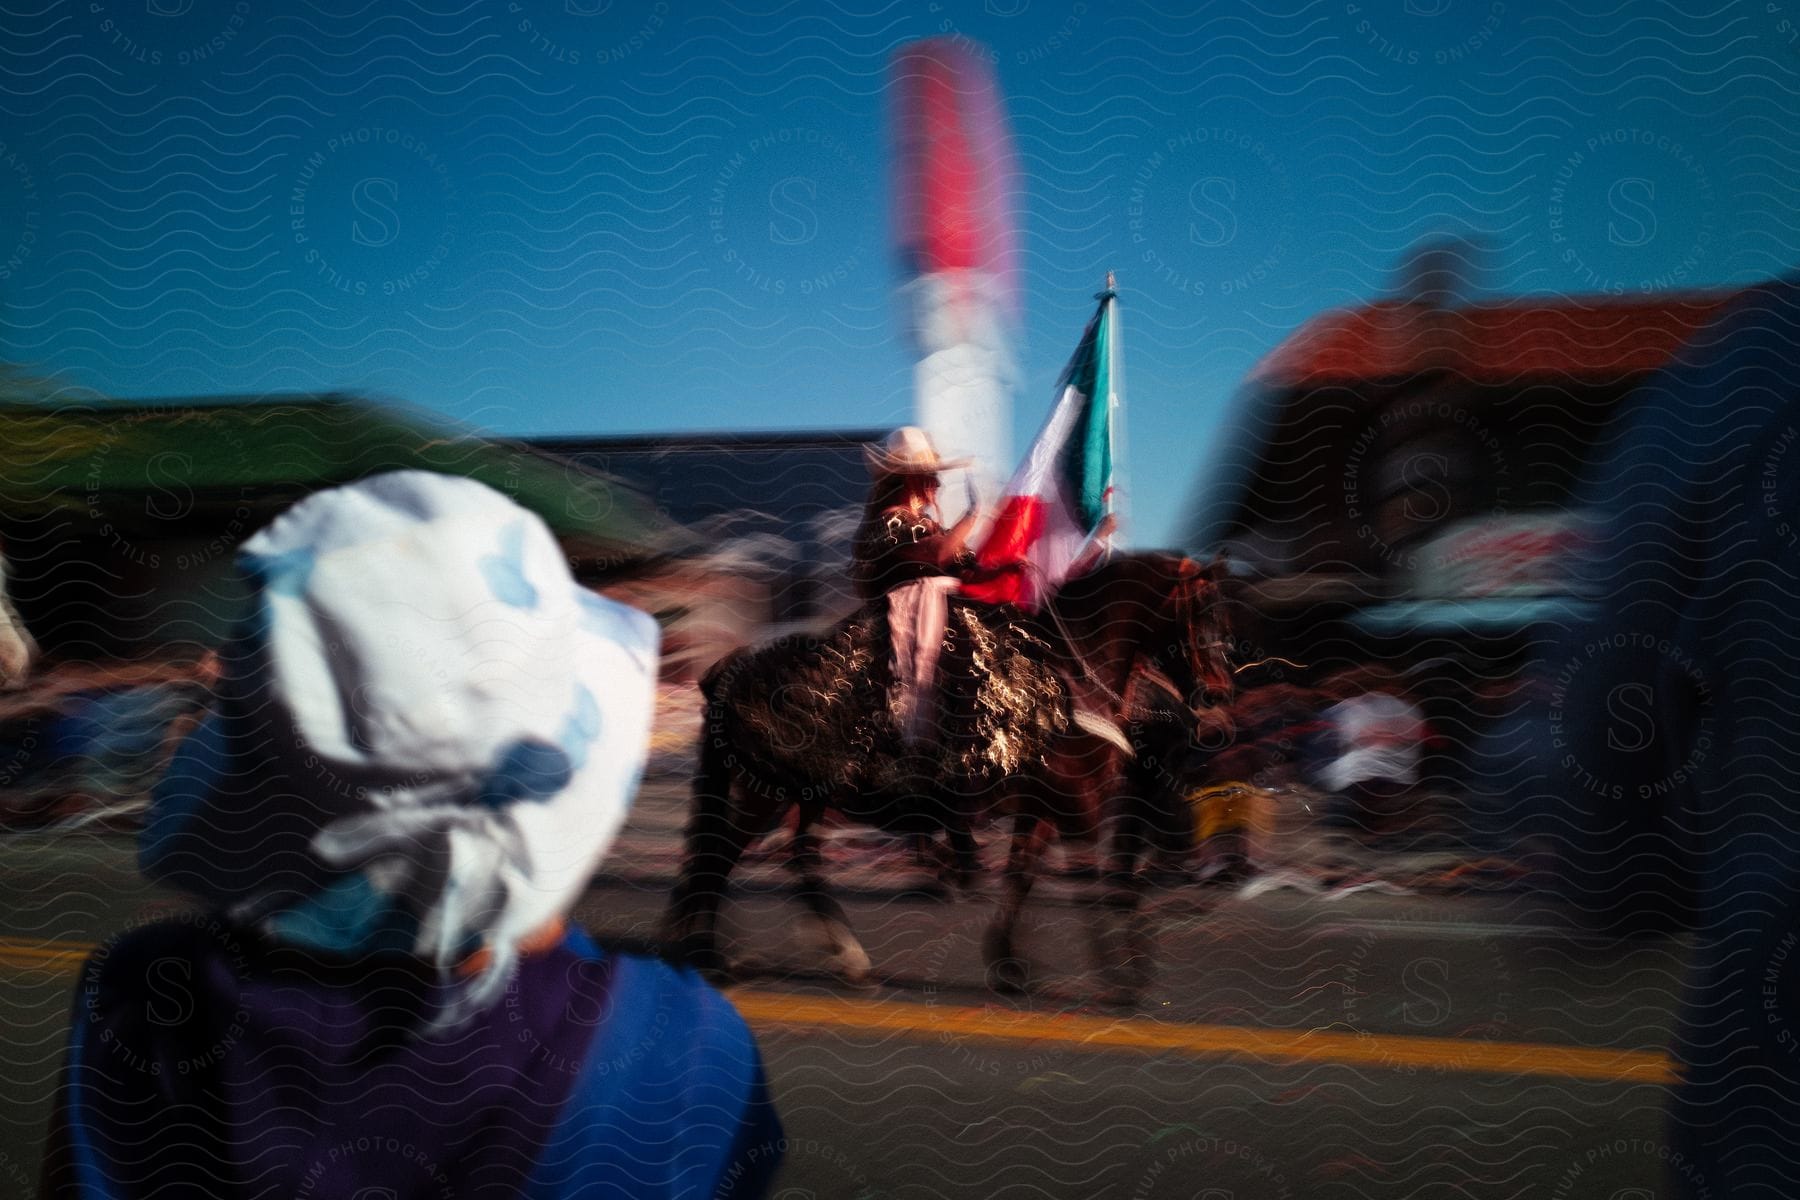 A blurry shot of a person riding a horse on the town streets carrying a mexican flag